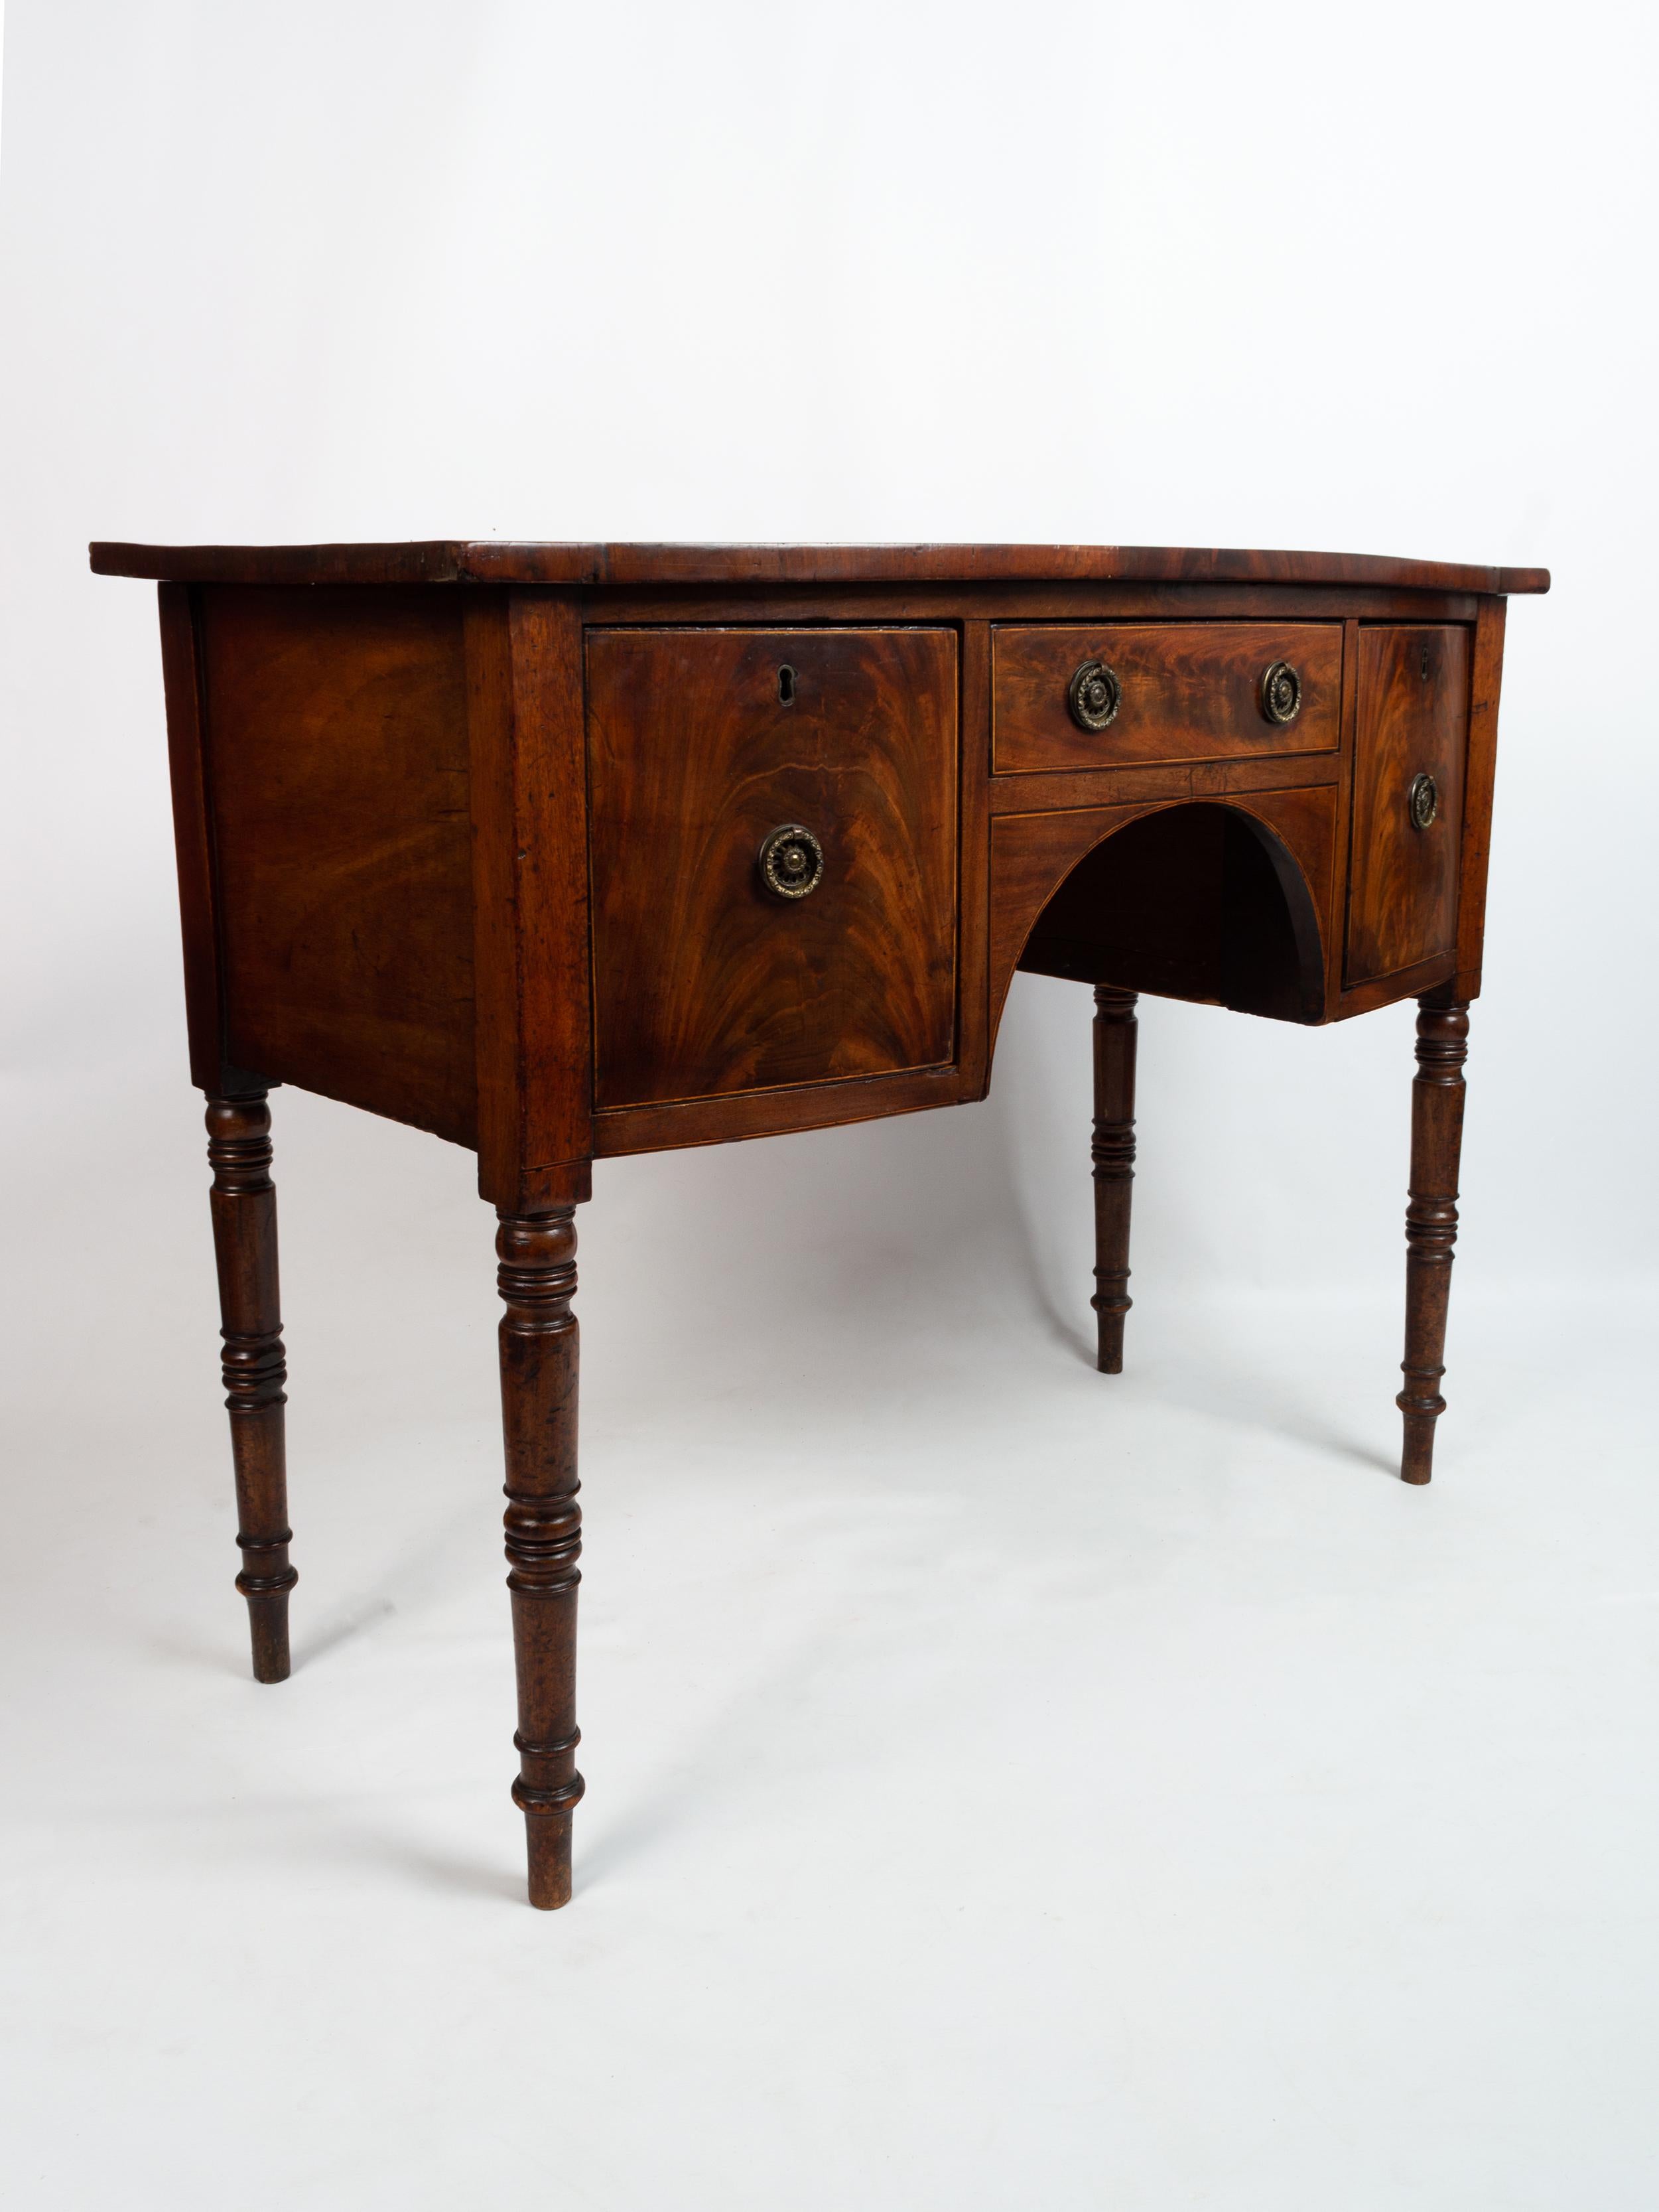 Antique English Georgian Flame mahogany server console hall table. Circa. 1790 

George III mahogany sideboard, with a wonderful original patina and brass pull handles.

Neatly proportioned, ideal for a hallway or as a console table.
In very